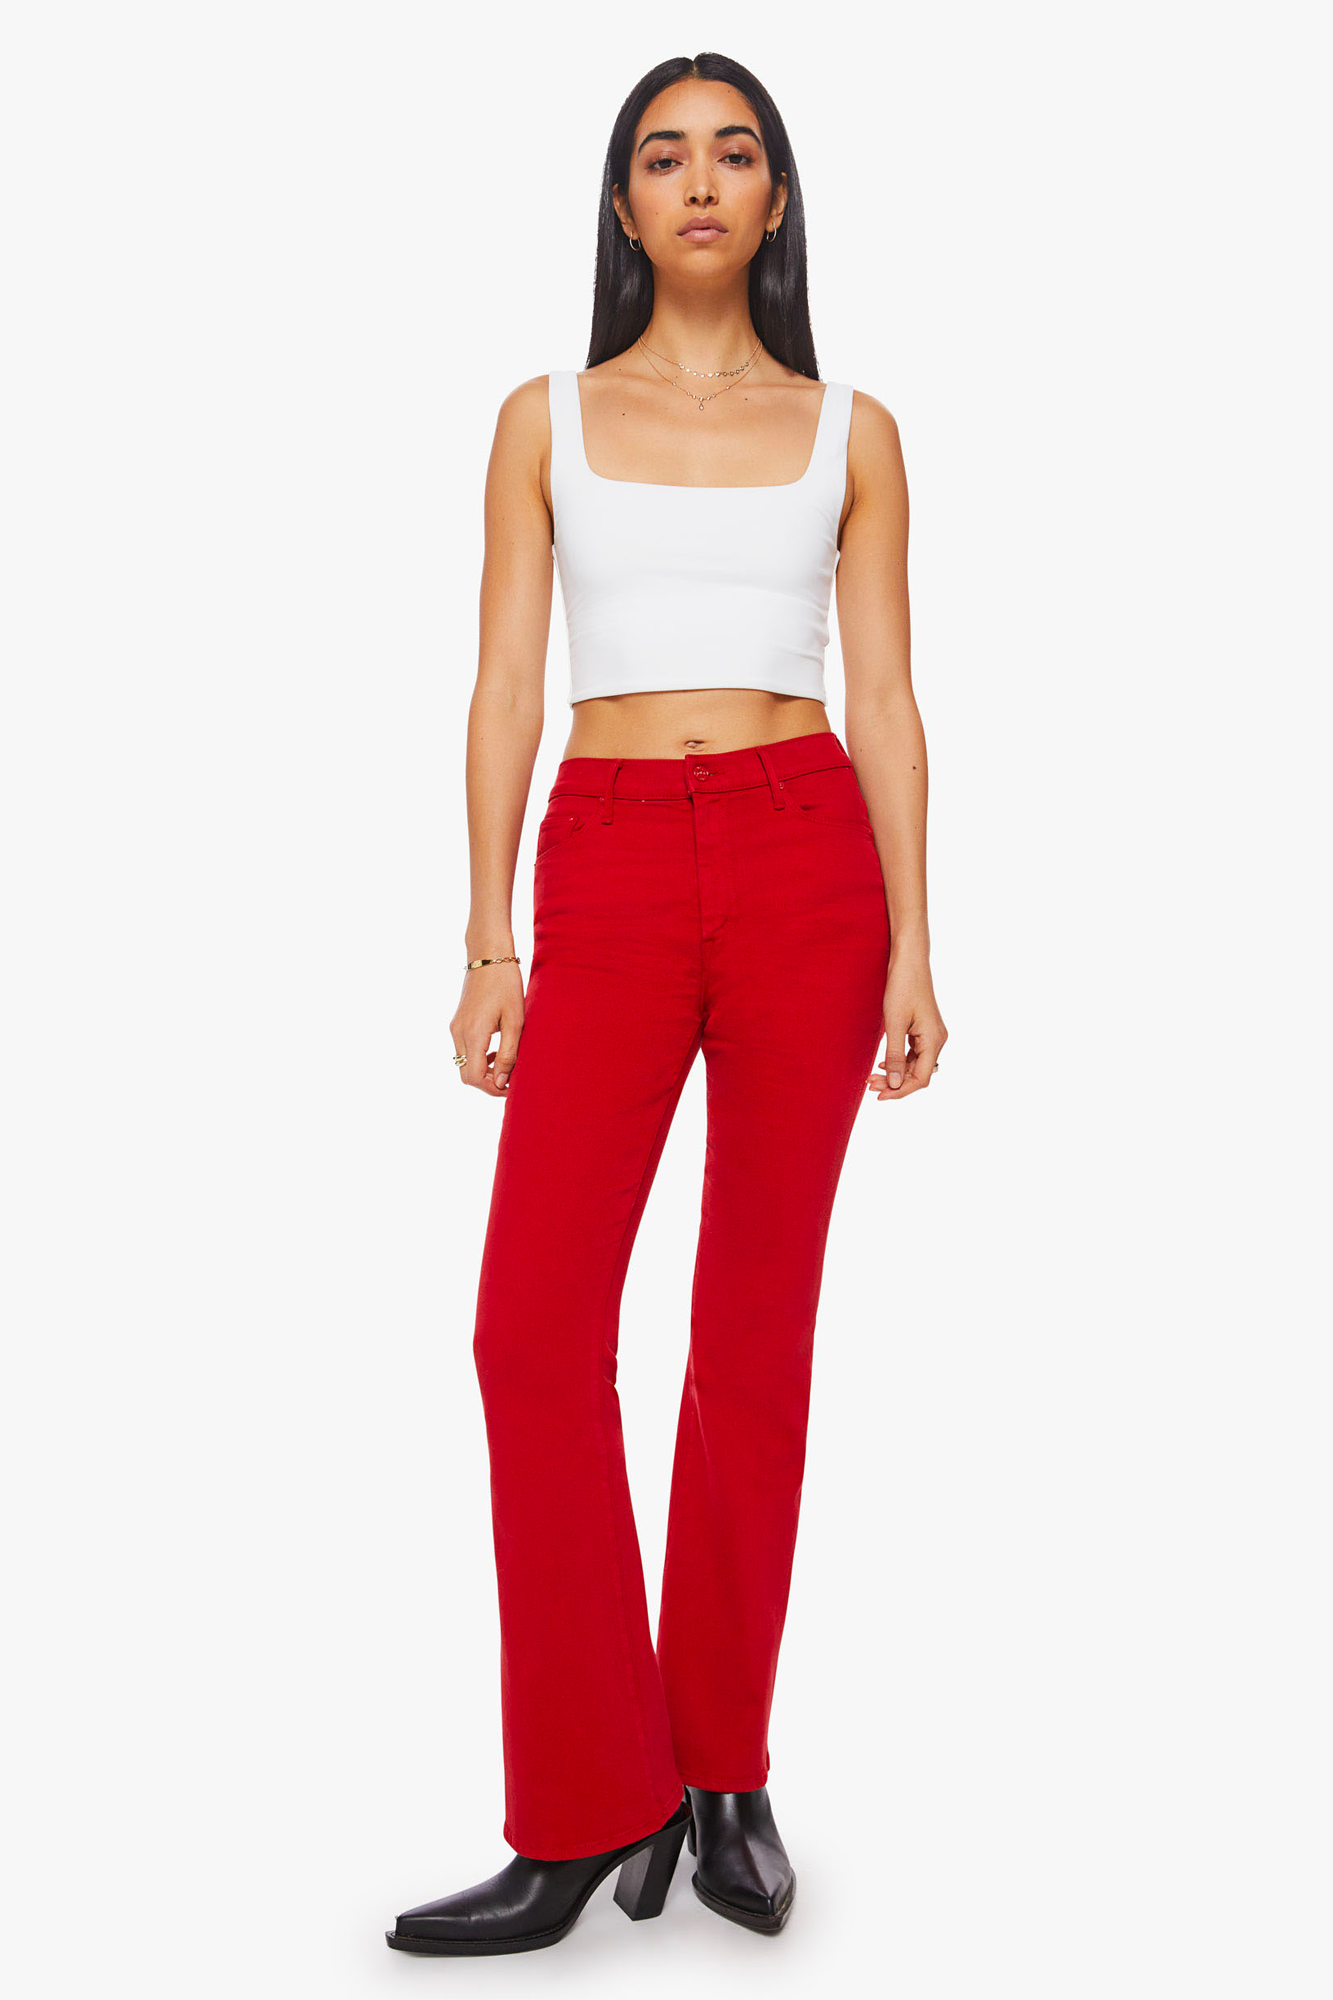 This High Waisted Weekender Skimp is perfect for a relaxed, fashionable look. It has a high rise cut, a long 31-inch inseam, and a clean hem. Made from a durable cotton blend with a hint of stretch, it comes in a bright and eye-catching red hue and features tonal hardware for an elegant monochrome look.